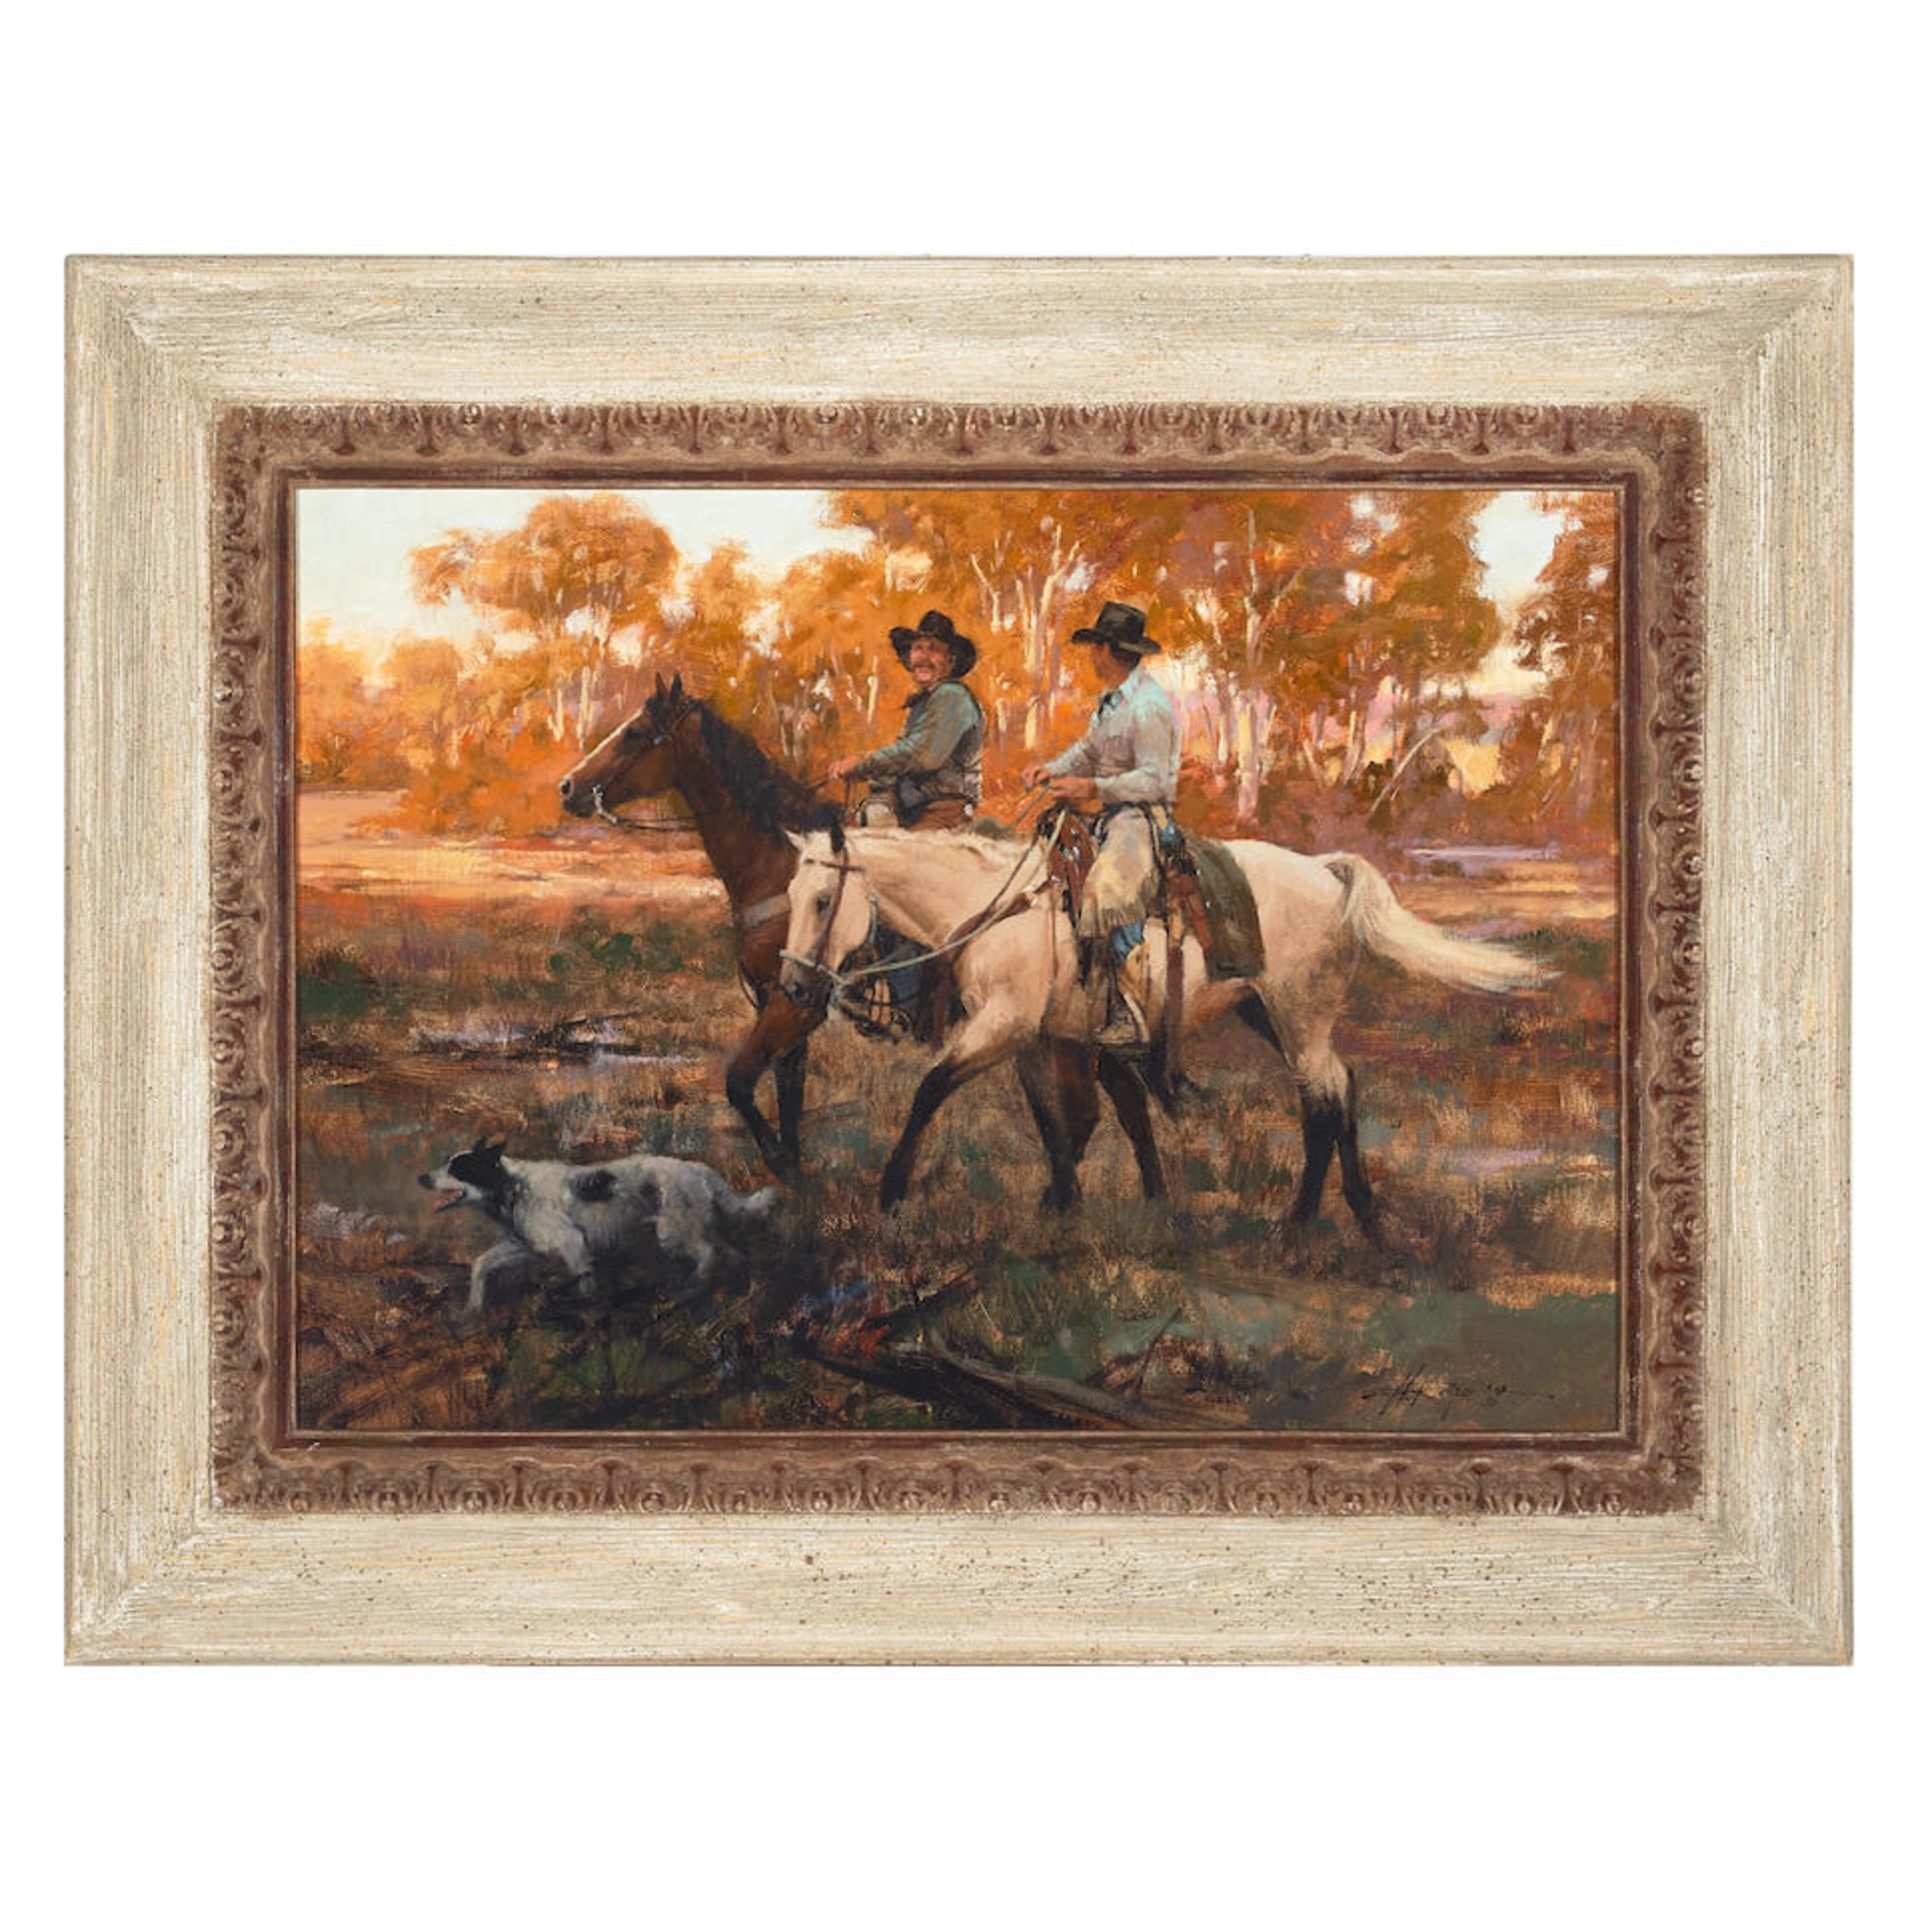 Howard Rogers (born 1932) Good Company 20 x 28 in. framed 29 x 37 1/2 in. - Image 2 of 2